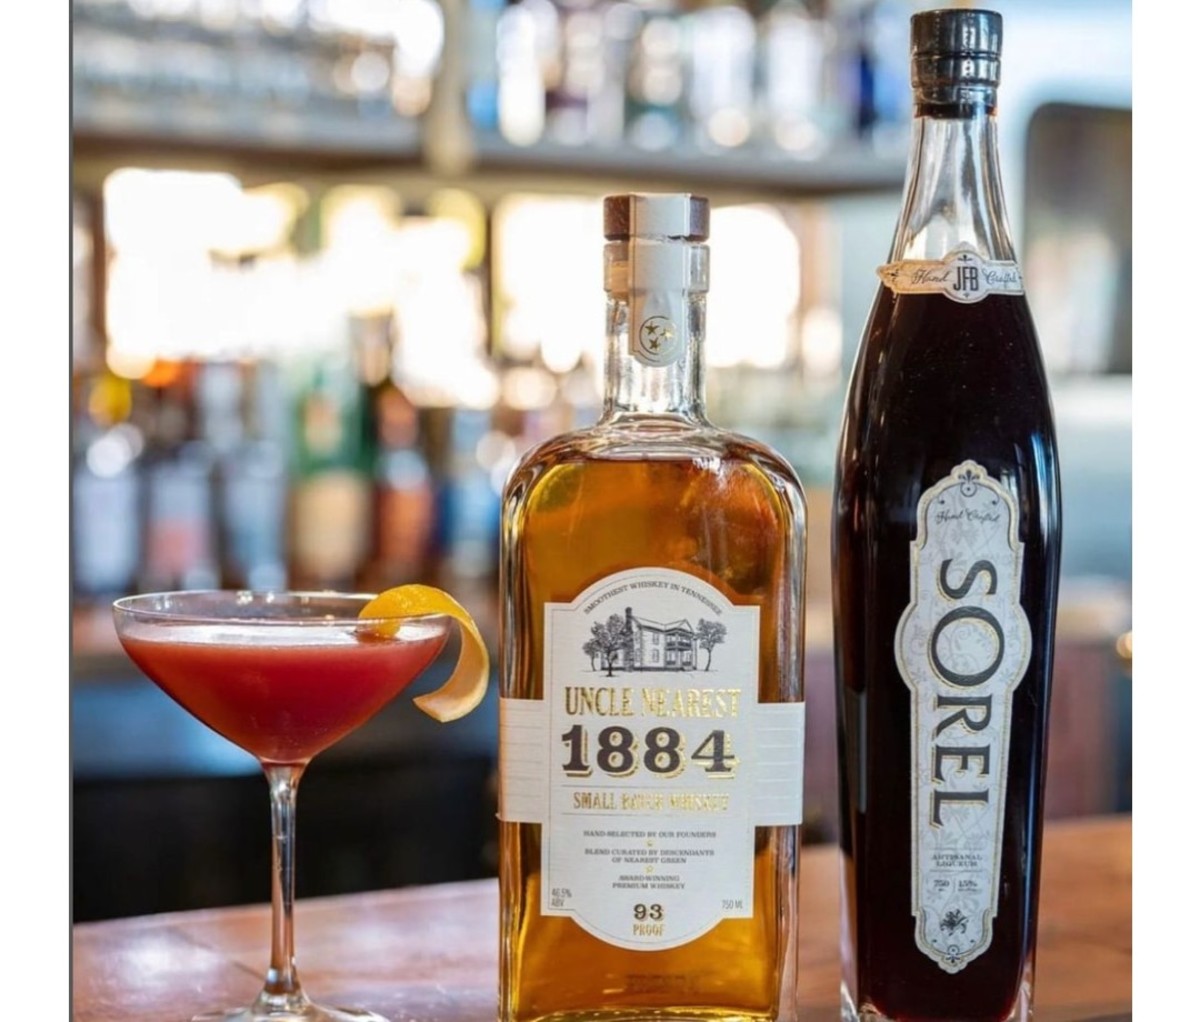 Sorel Trinidad Sour at The Fishery in San Diego.